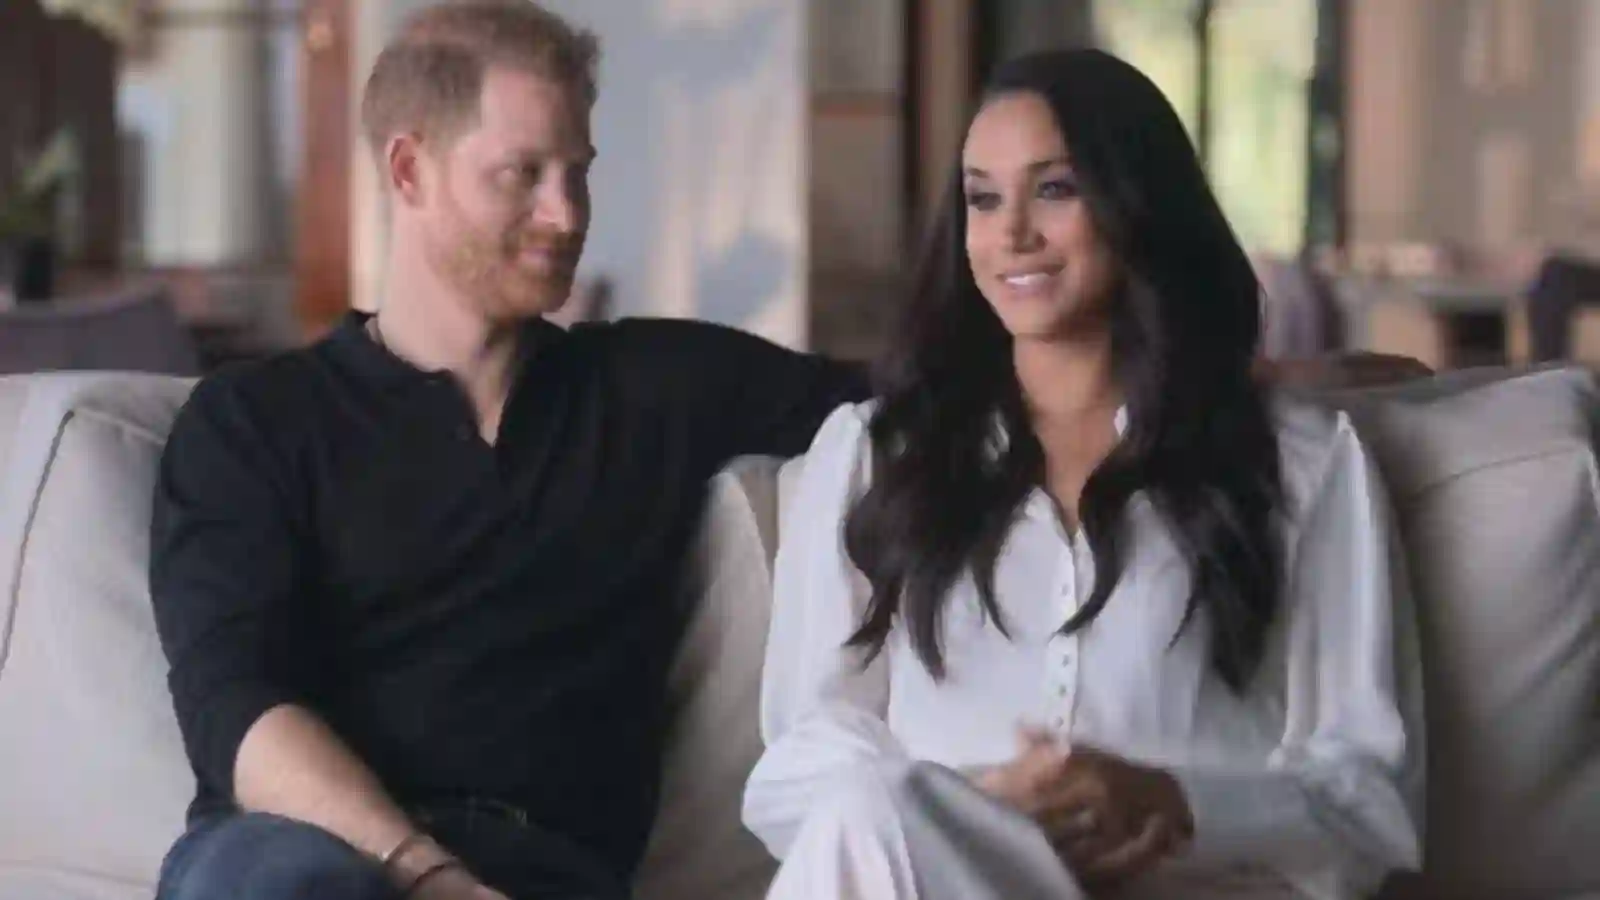 Prince Harry and Meghan Markle in Neflix's 'Harry & Meghan'